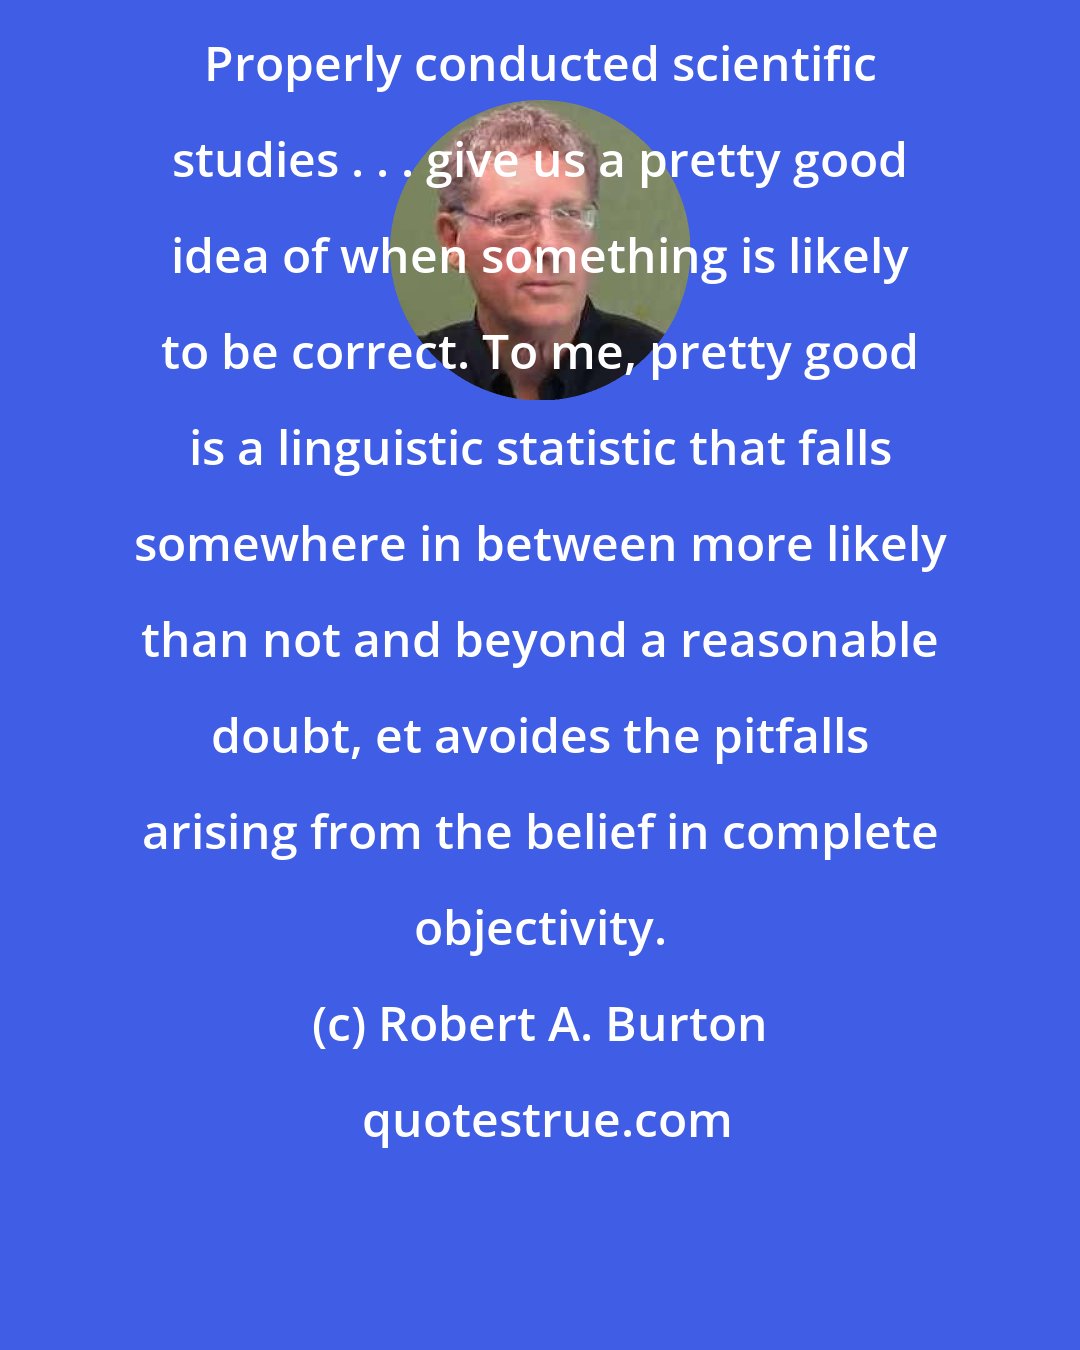 Robert A. Burton: Properly conducted scientific studies . . . give us a pretty good idea of when something is likely to be correct. To me, pretty good is a linguistic statistic that falls somewhere in between more likely than not and beyond a reasonable doubt, et avoides the pitfalls arising from the belief in complete objectivity.